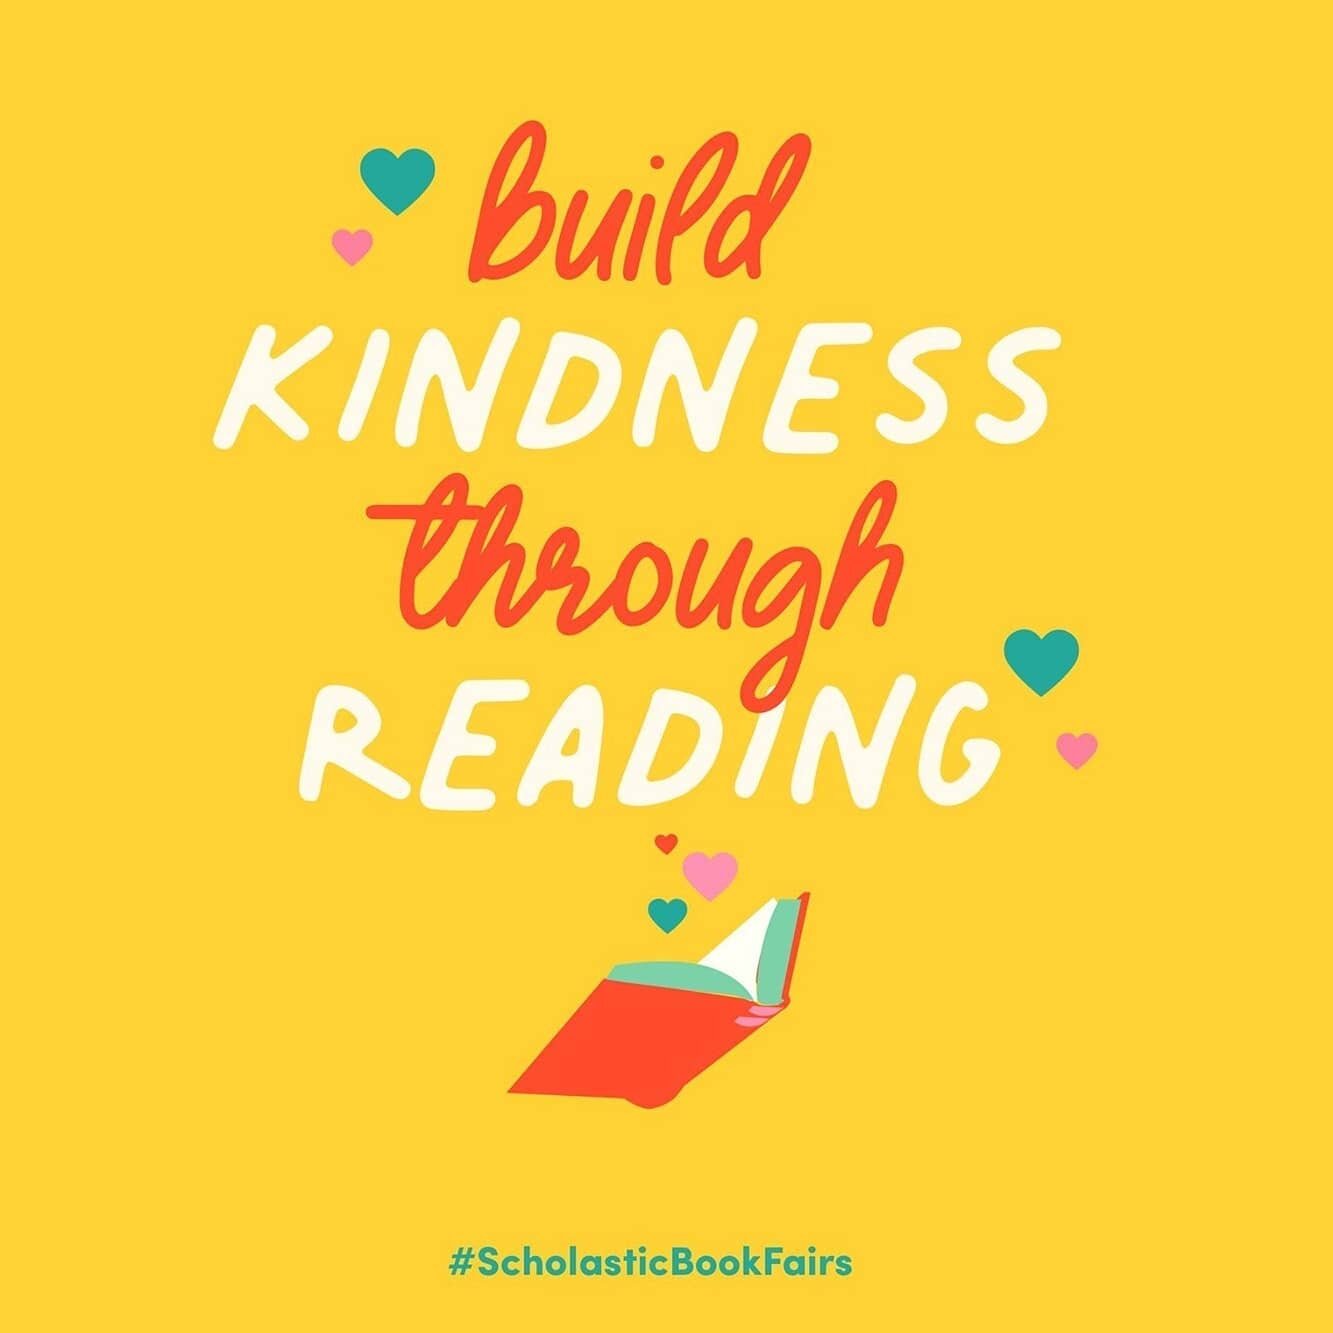 Our read-a-thon is going strong!! How are you doing on your reading goal, WPENS families?? Any WPENS alum looking to help with a donation? You can donate here via Instagram or head on over to WPENS.org and look for our PayPal link at the bottom (says